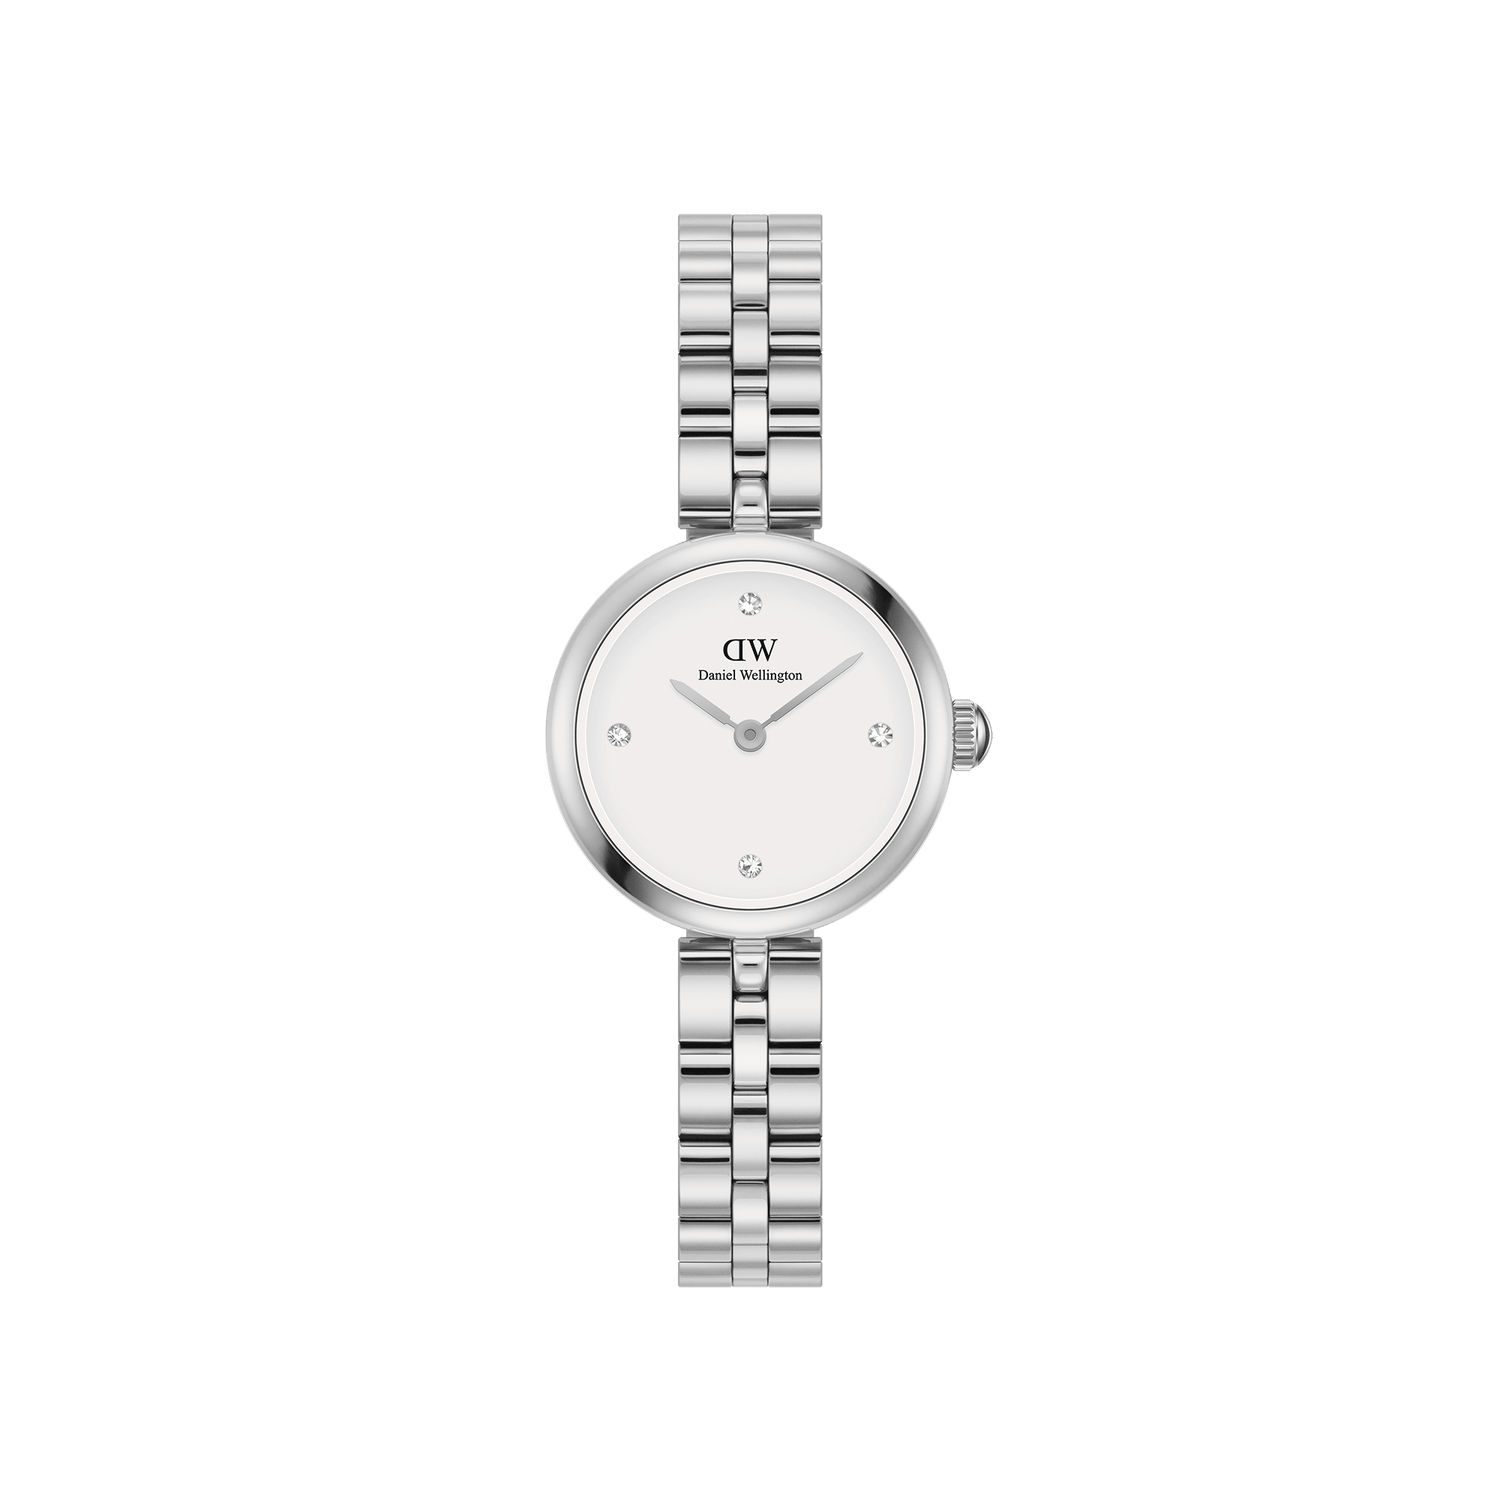 Silver watches - Women and men's watches in silver | DW